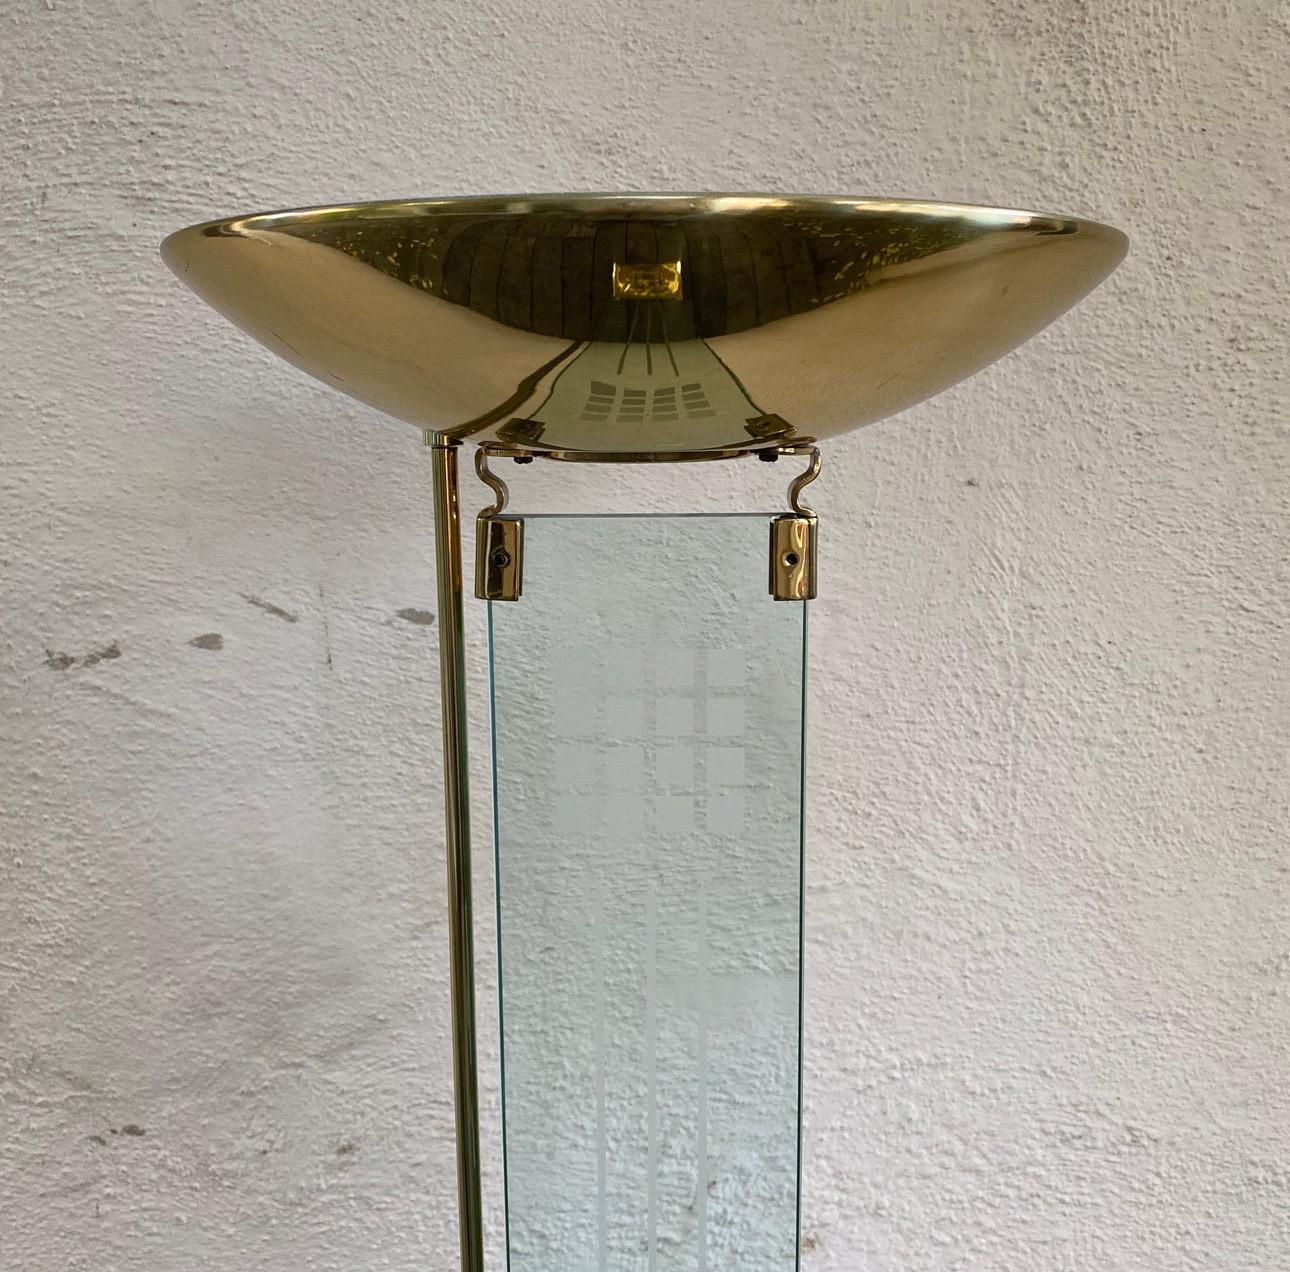 🌟 Stunning 1980's Hollywood Regency Floor Lamp for Sale! 🌟

Elevate your space with this exquisite Hollywood Regency style floor lamp, reminiscent of vintage glamour and sophistication. Crafted with impeccable detail, this lamp exudes timeless